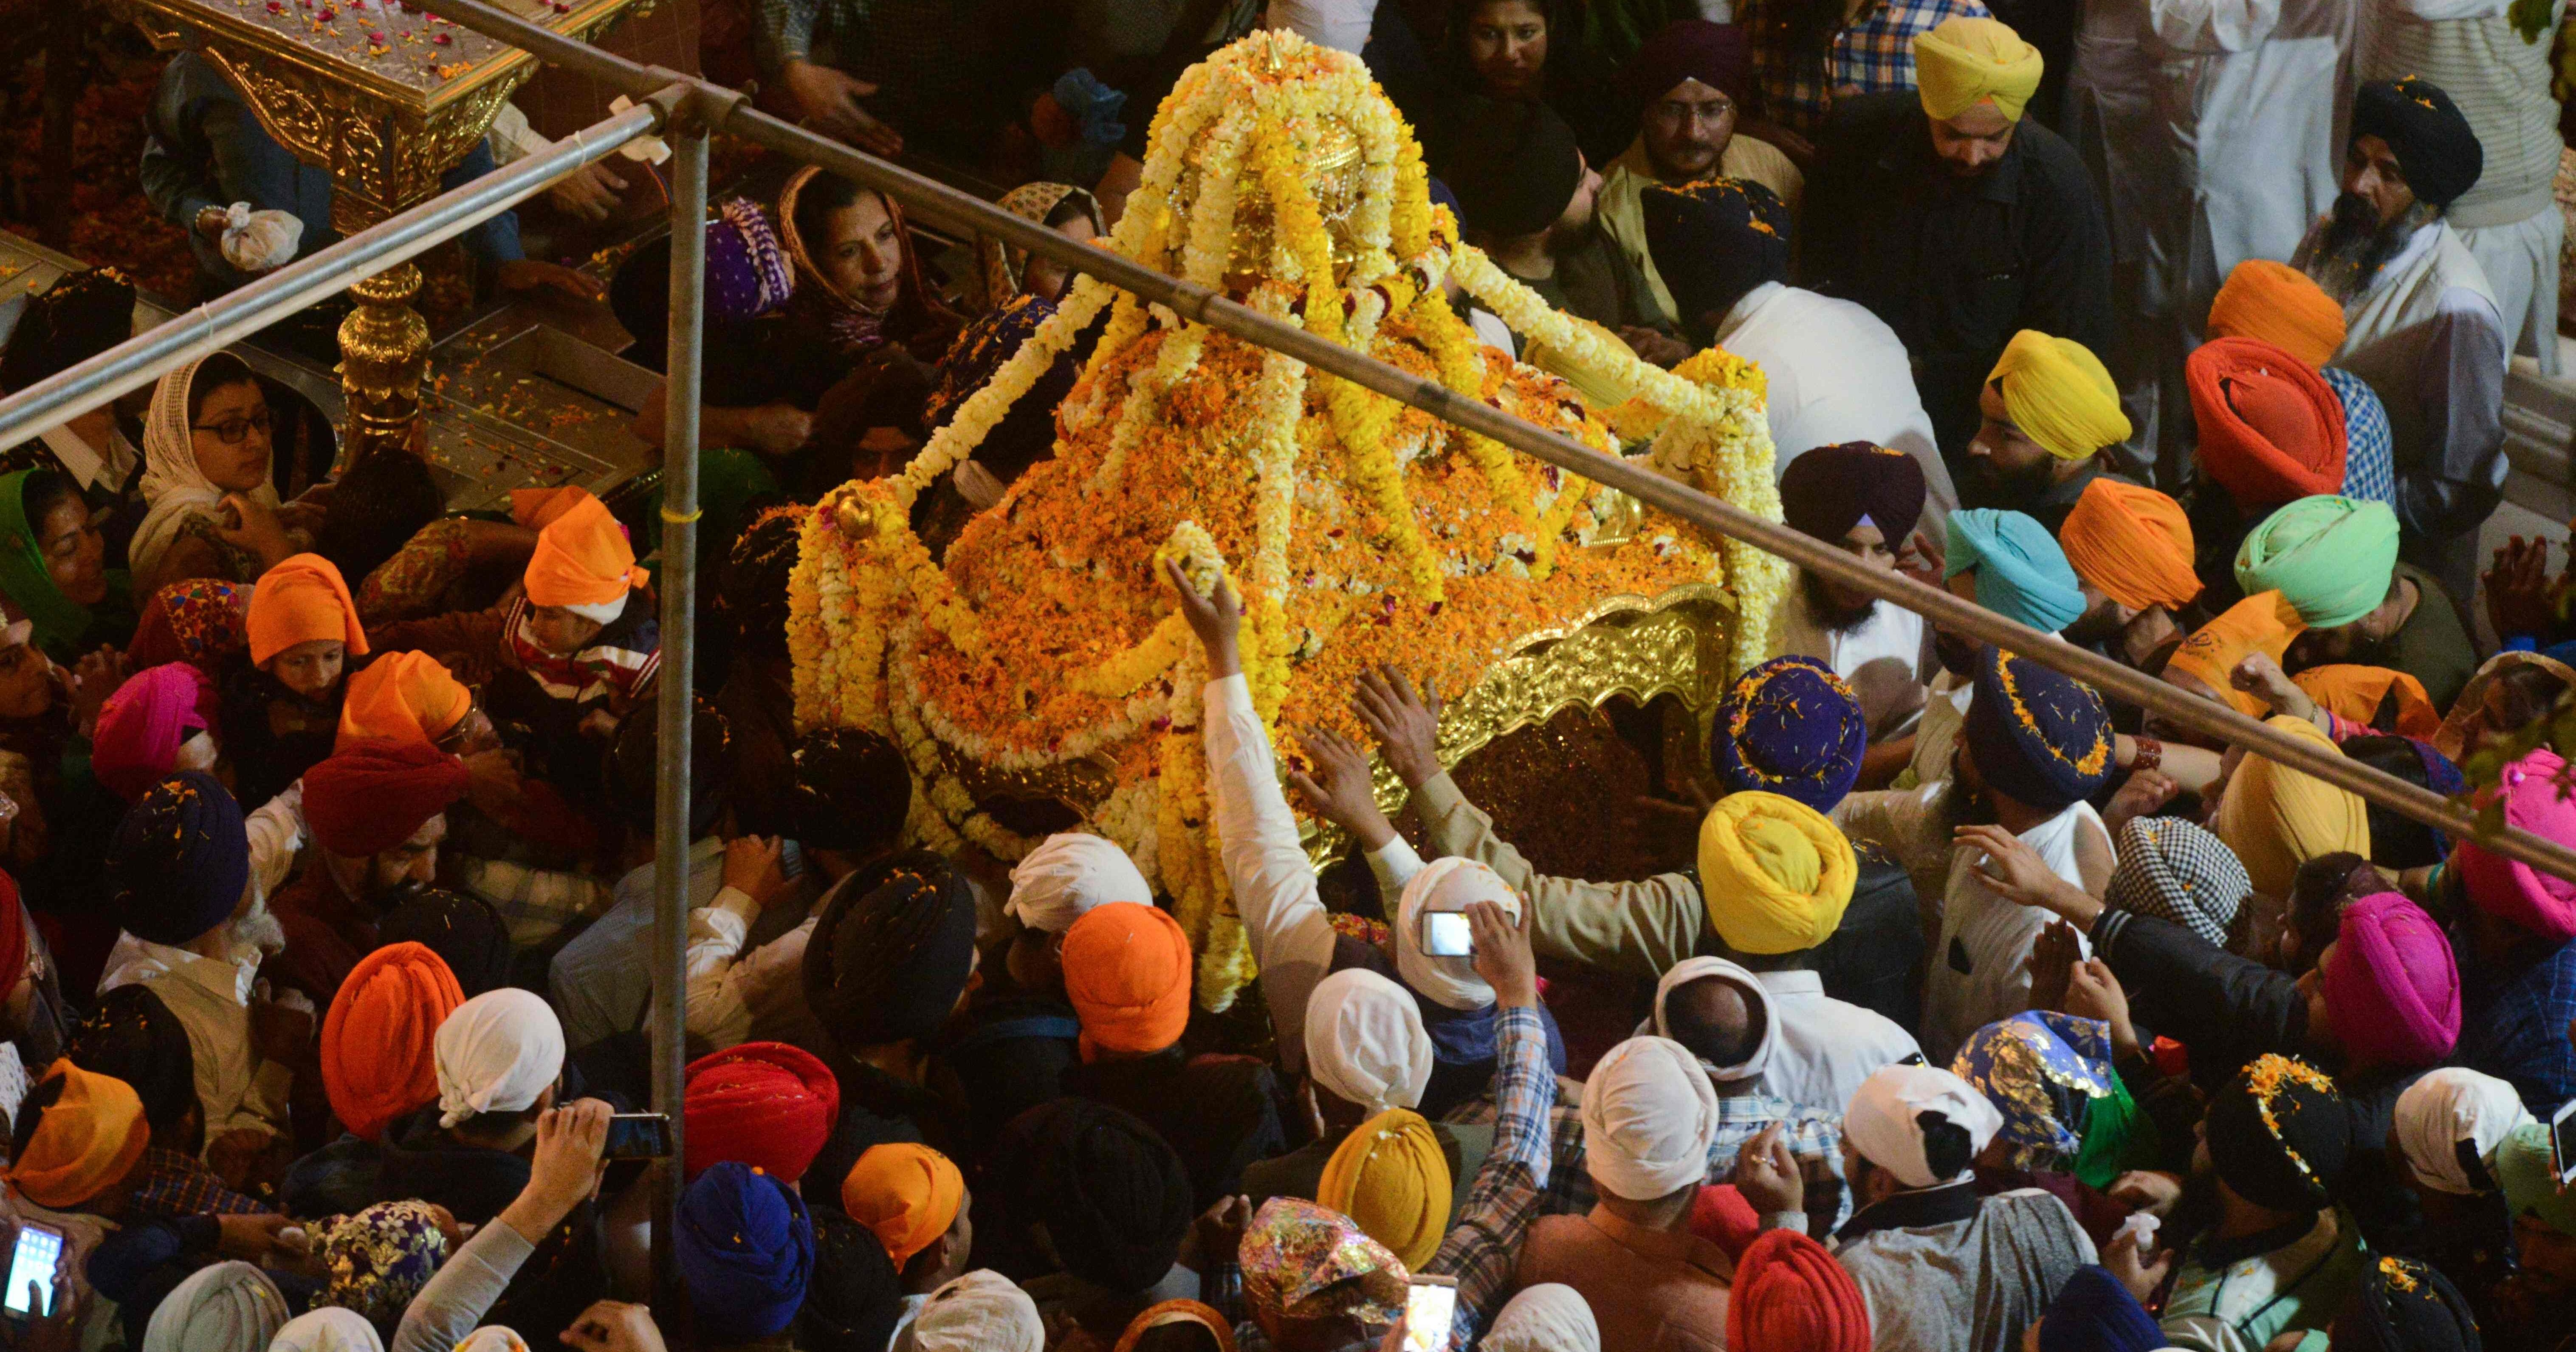 Thousands Converge For 'Hola Mohalla' Celebrations